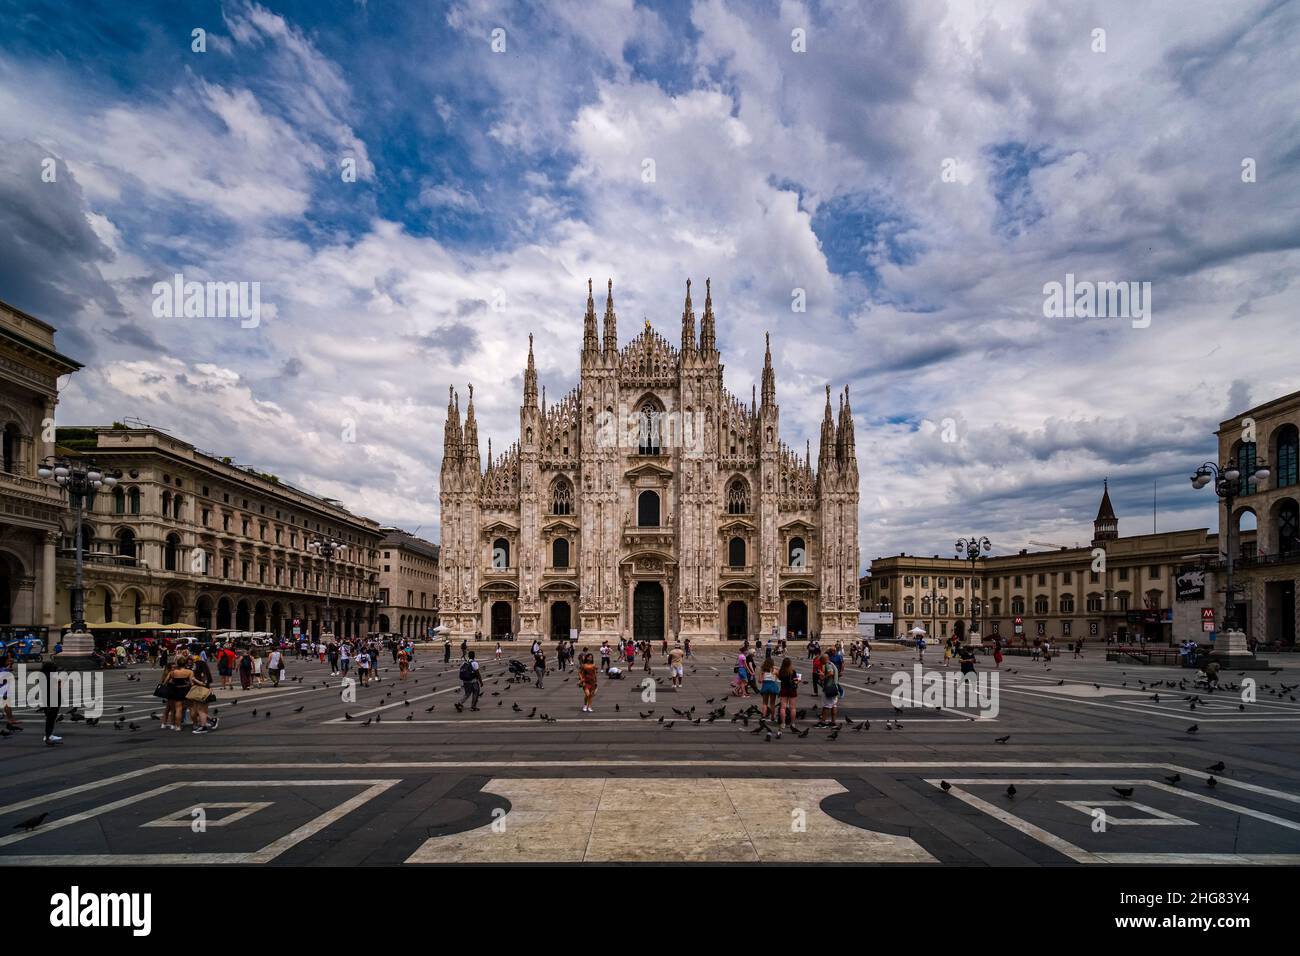 View of the facade of the Milan cathedral, Duomo di Milano, seen from Cathedral Square, Piazza del Duomo. Stock Photo